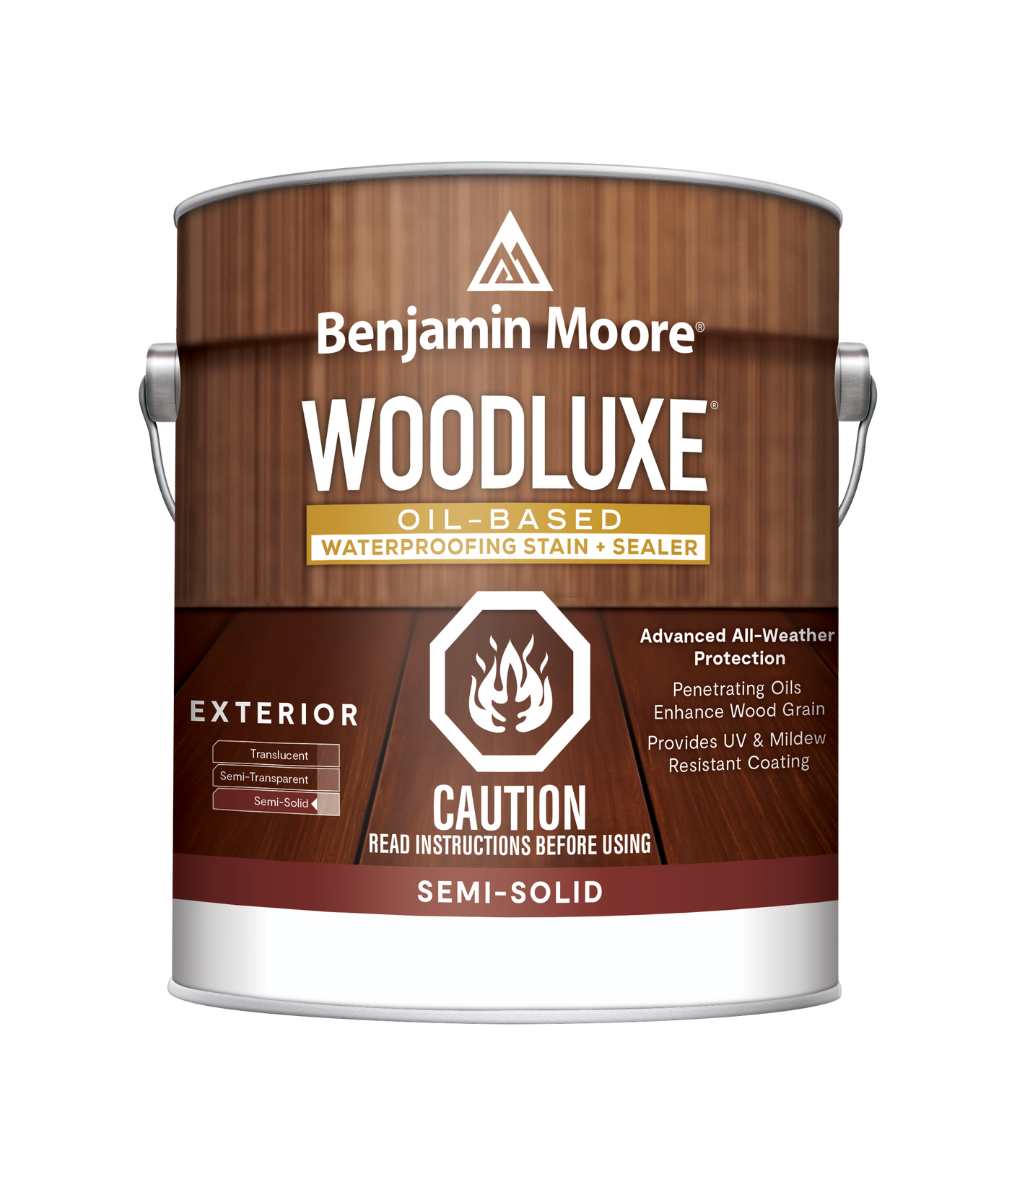 Woodluxe® Oil-Based Semi-Solid